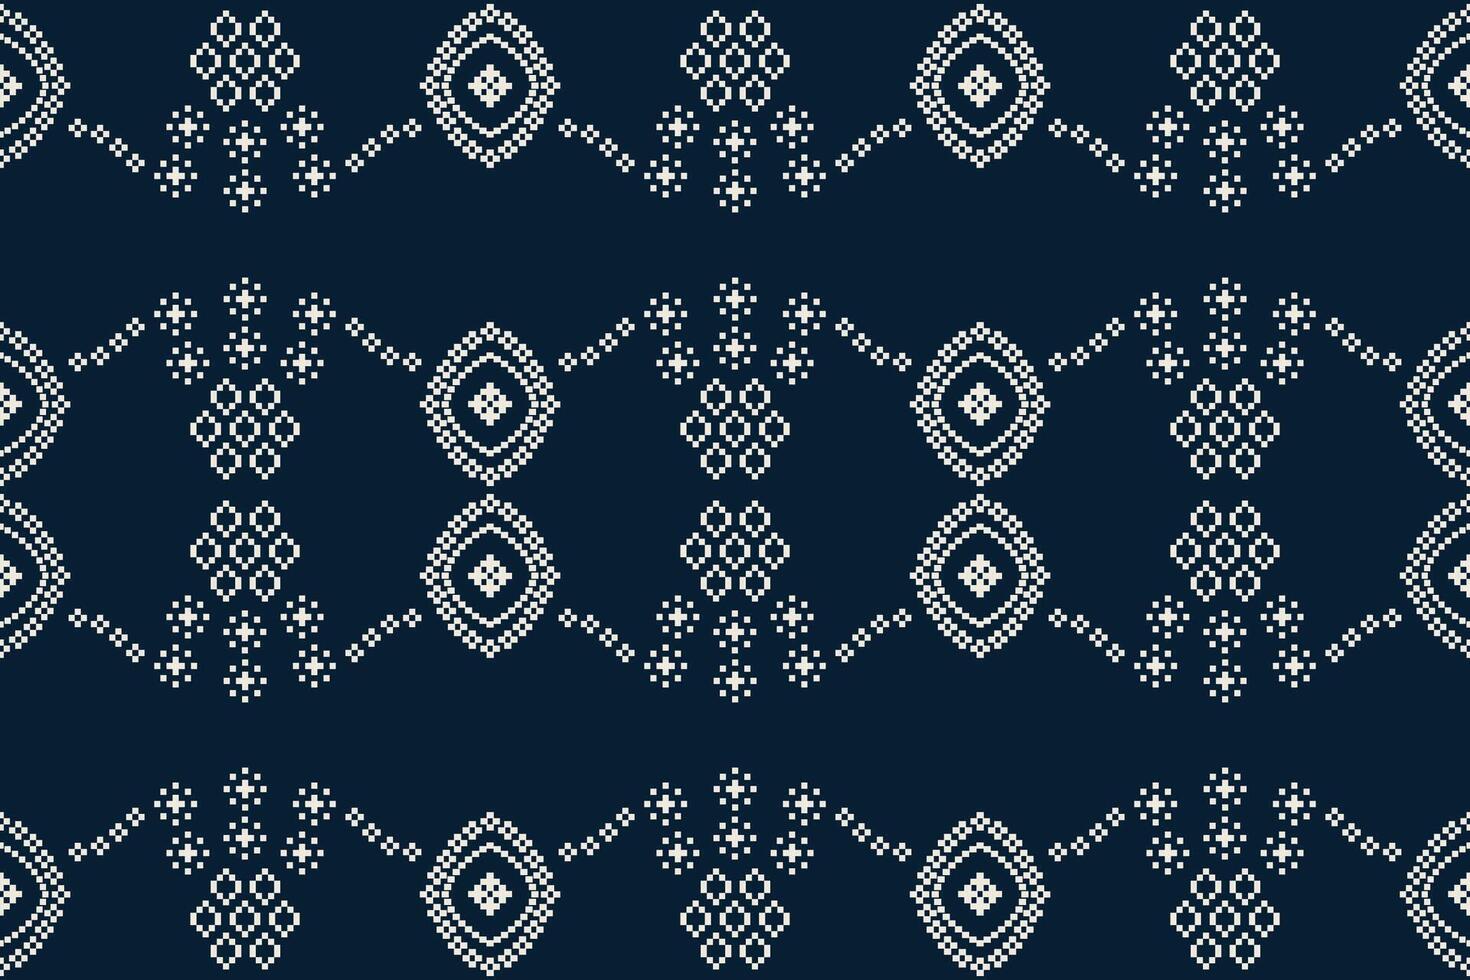 Traditional ethnic motifs ikat geometric fabric pattern cross stitch.Ikat embroidery Ethnic oriental Pixel navy blue background. Abstract,illustration. Texture,decoration,wallpaper. vector